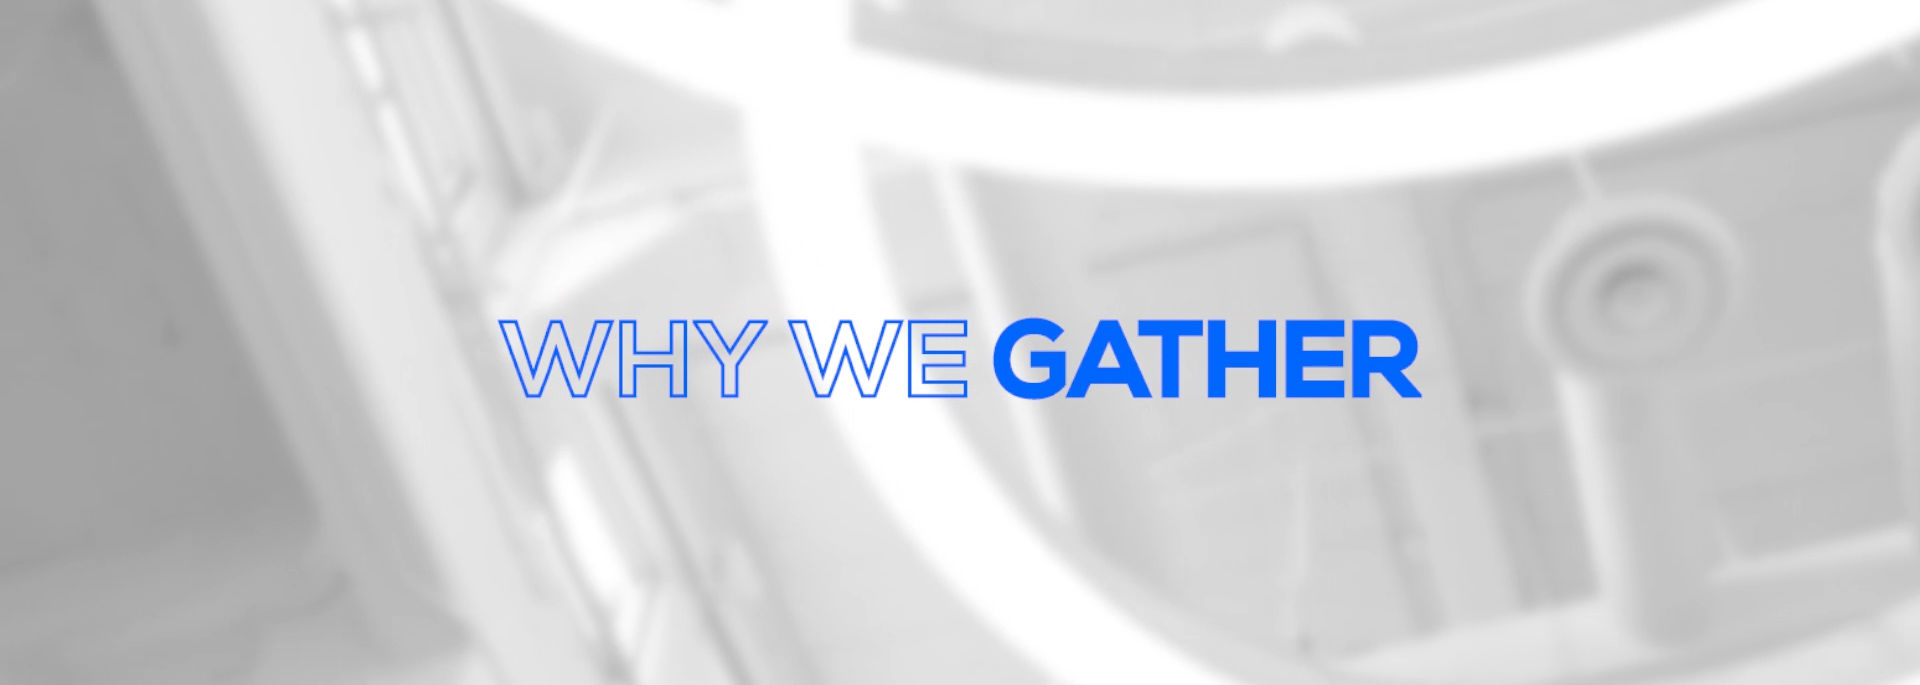 Why We Gather